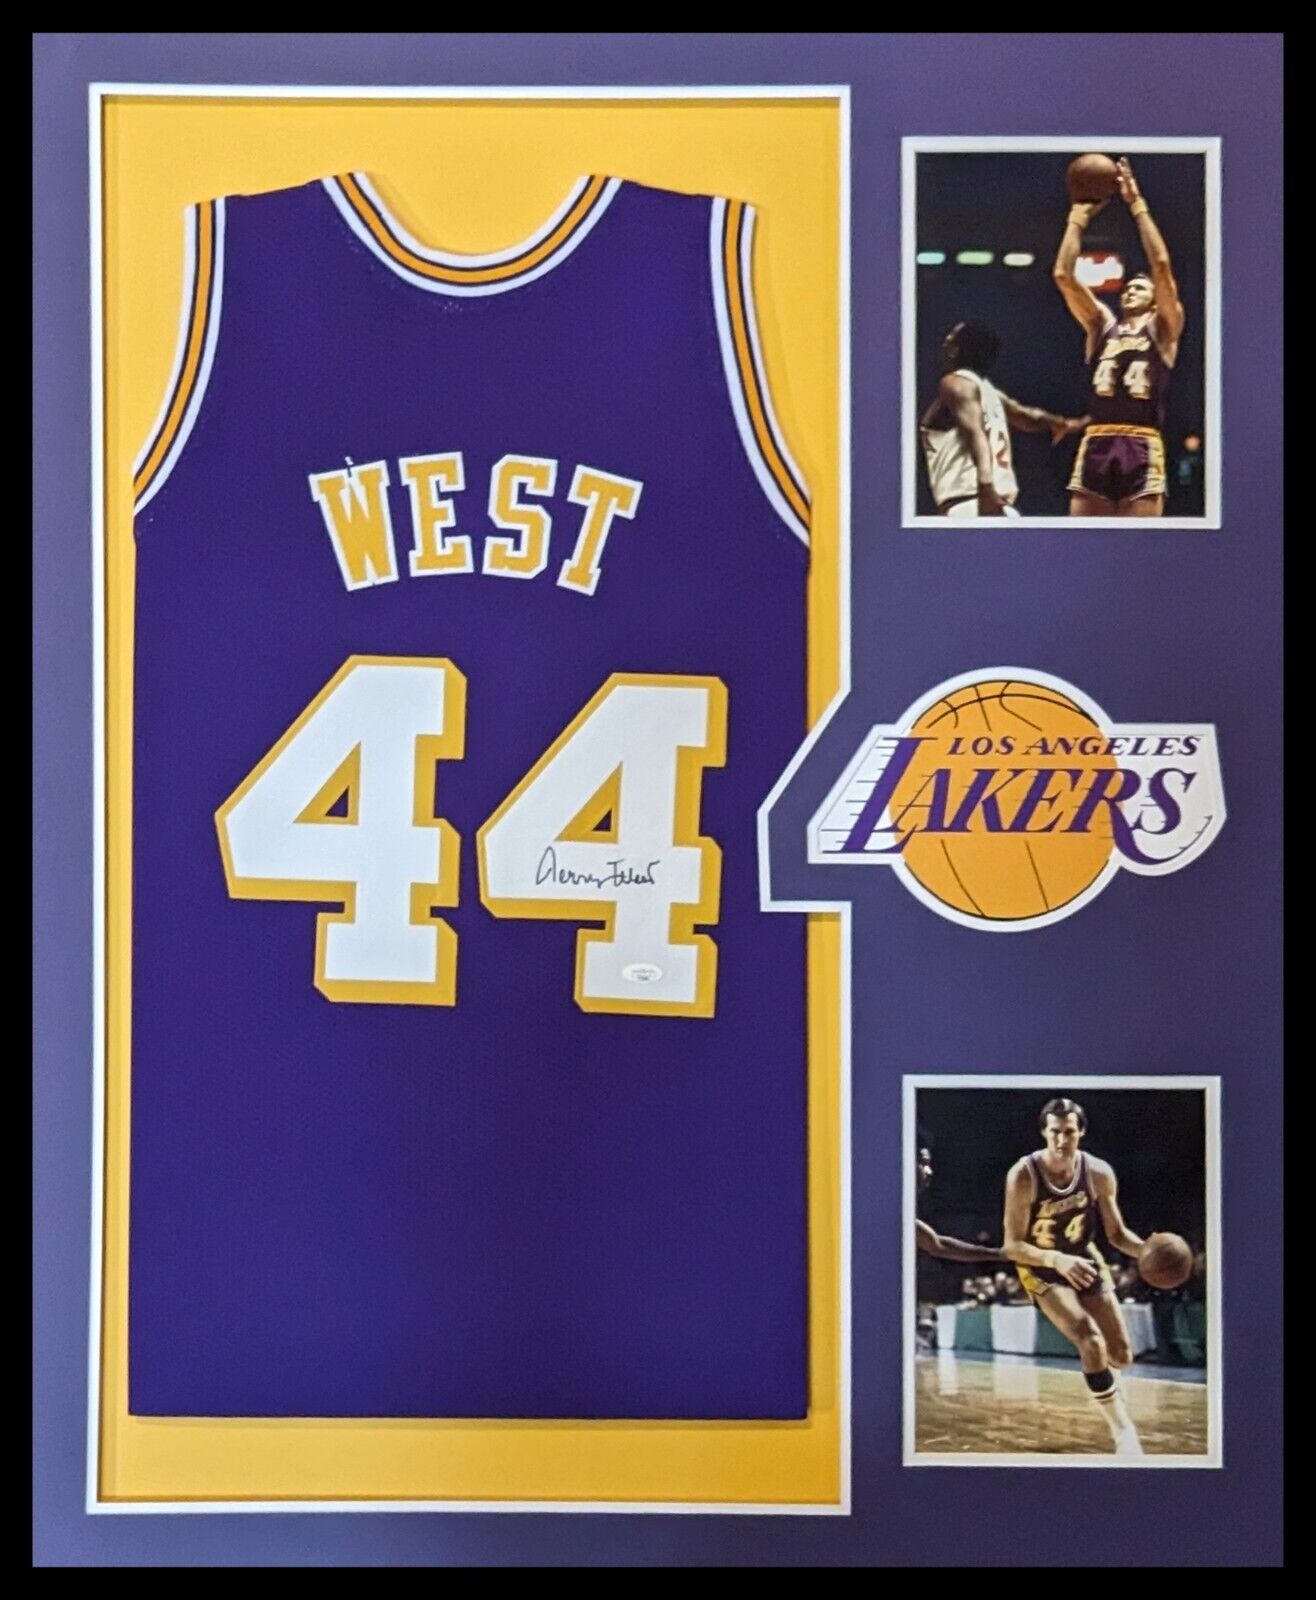 MVP Authentics Framed L.A. Lakers Jerry West Autographed Signed Jersey Jsa Coa 445.50 sports jersey framing , jersey framing